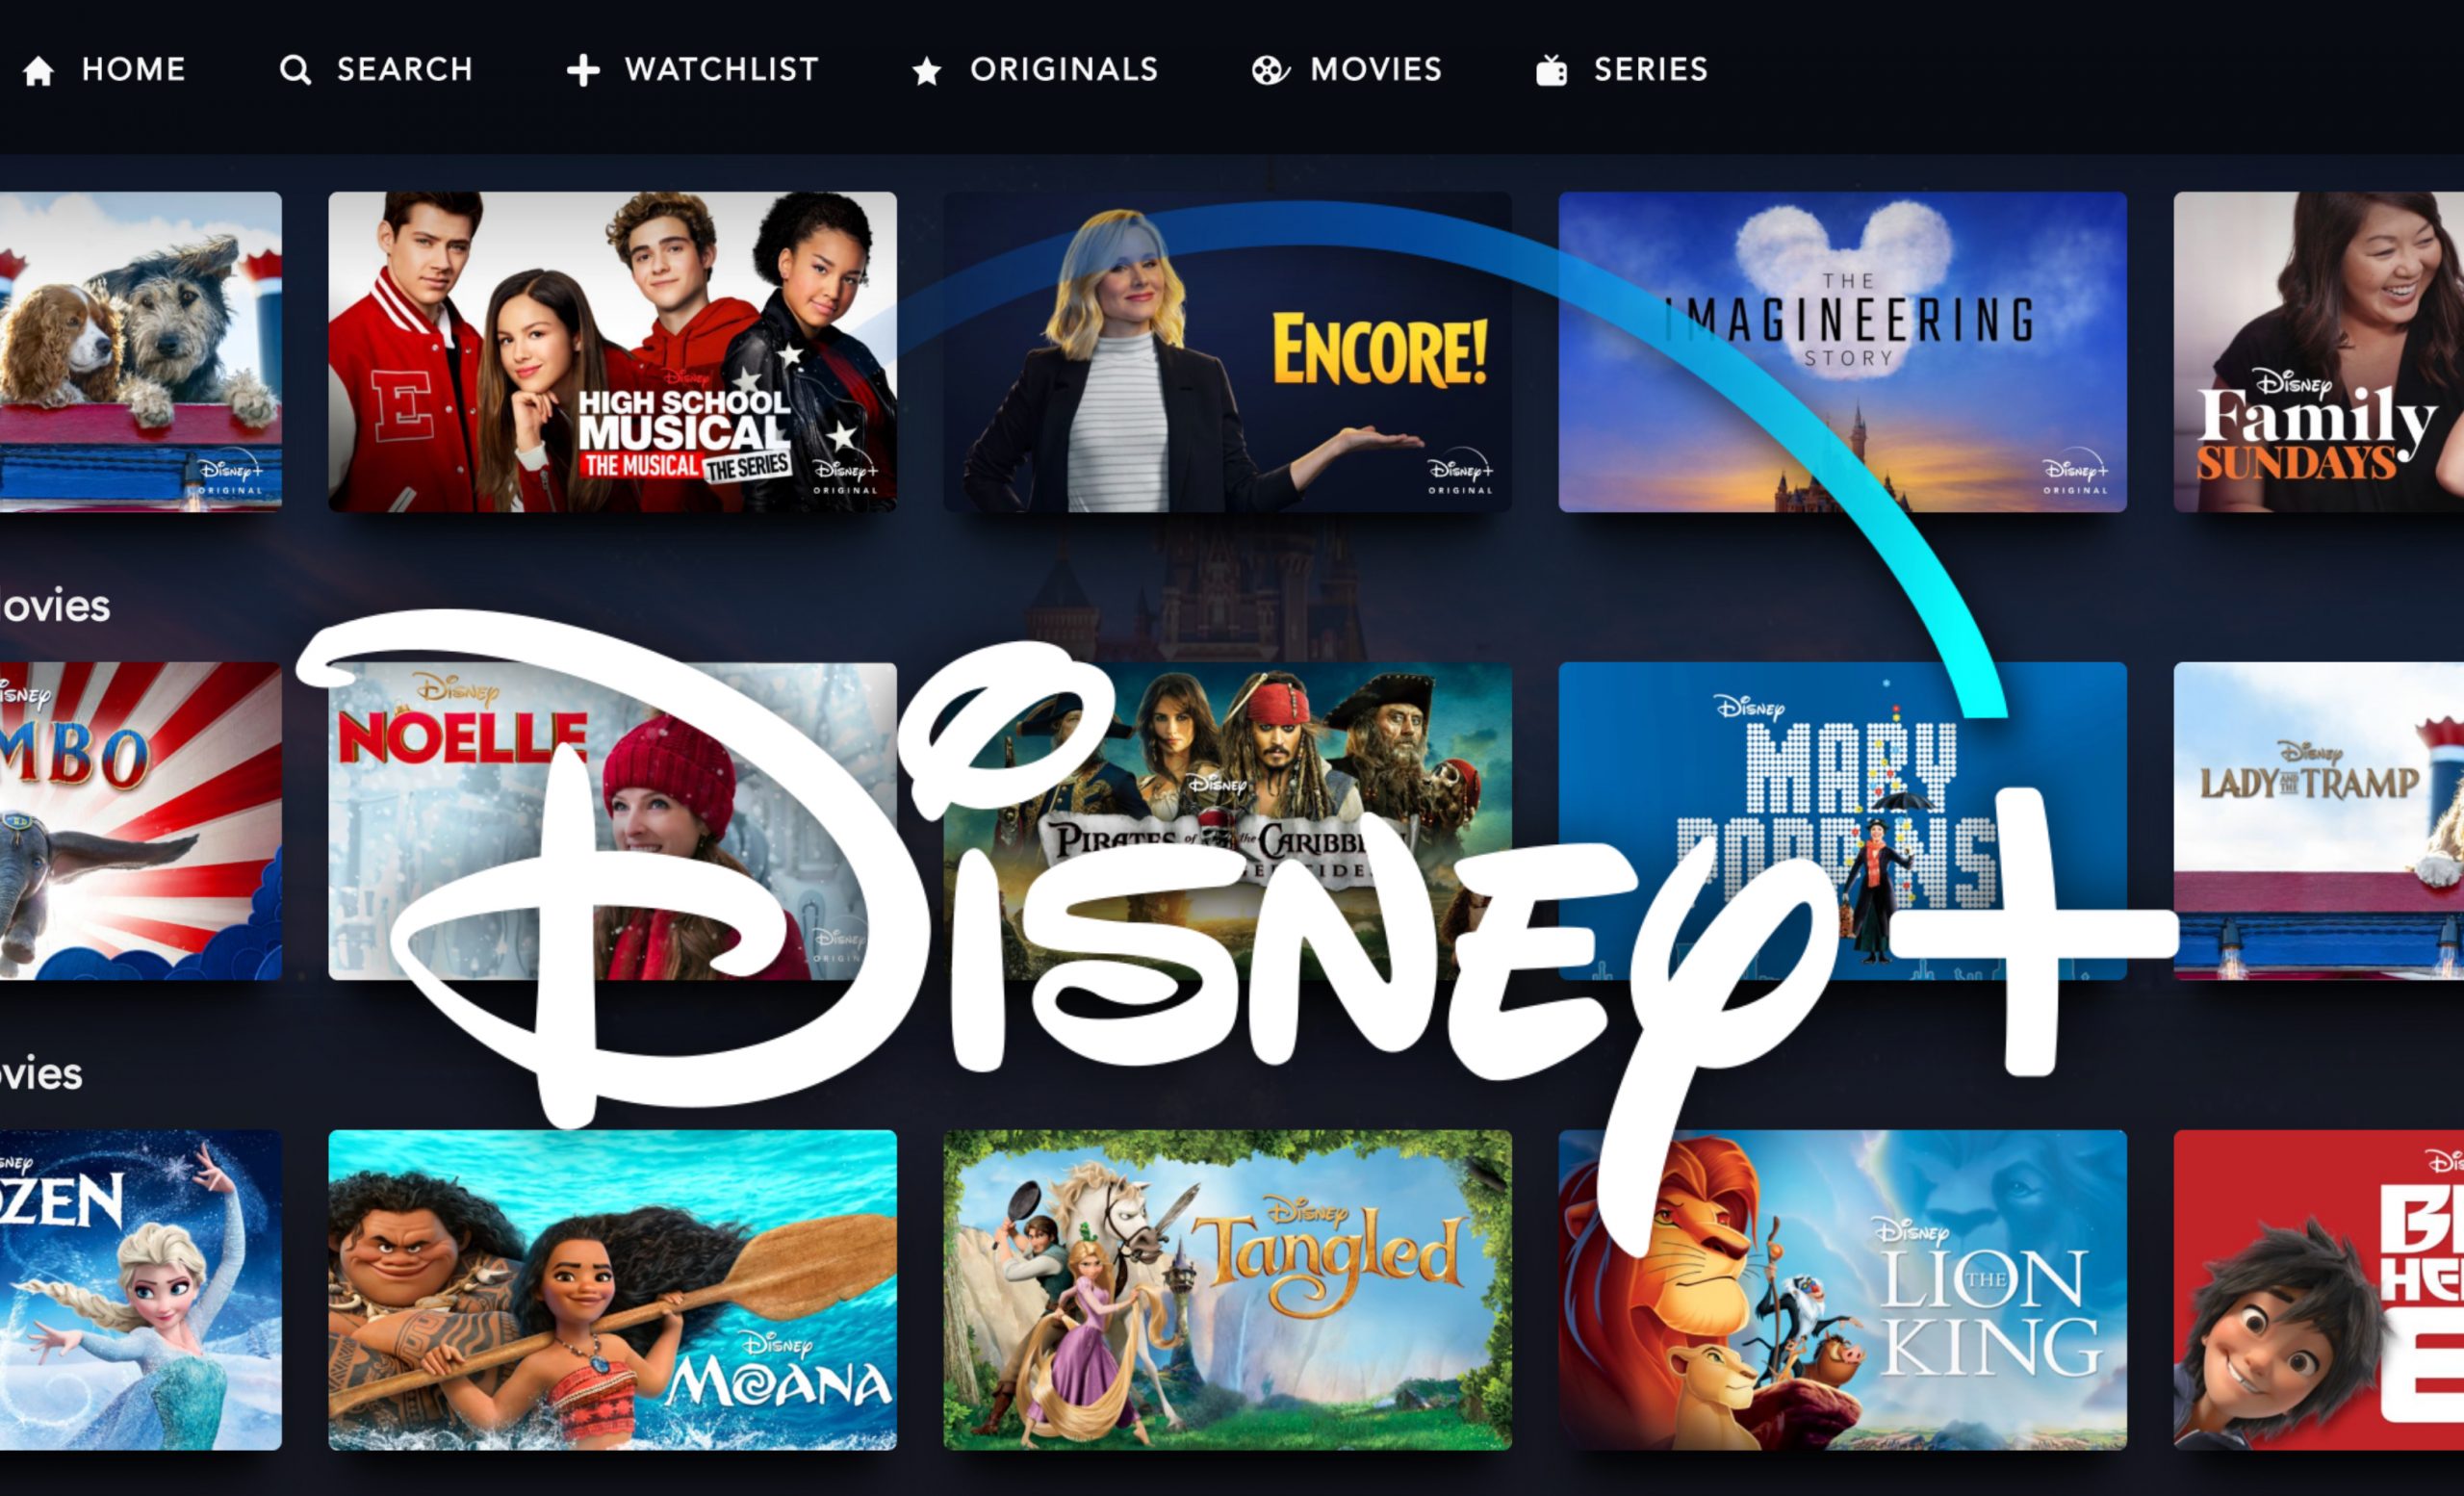 Disney+ Sees Largest Surge In Subscribers For Streaming Services During Coronavirus Concerns